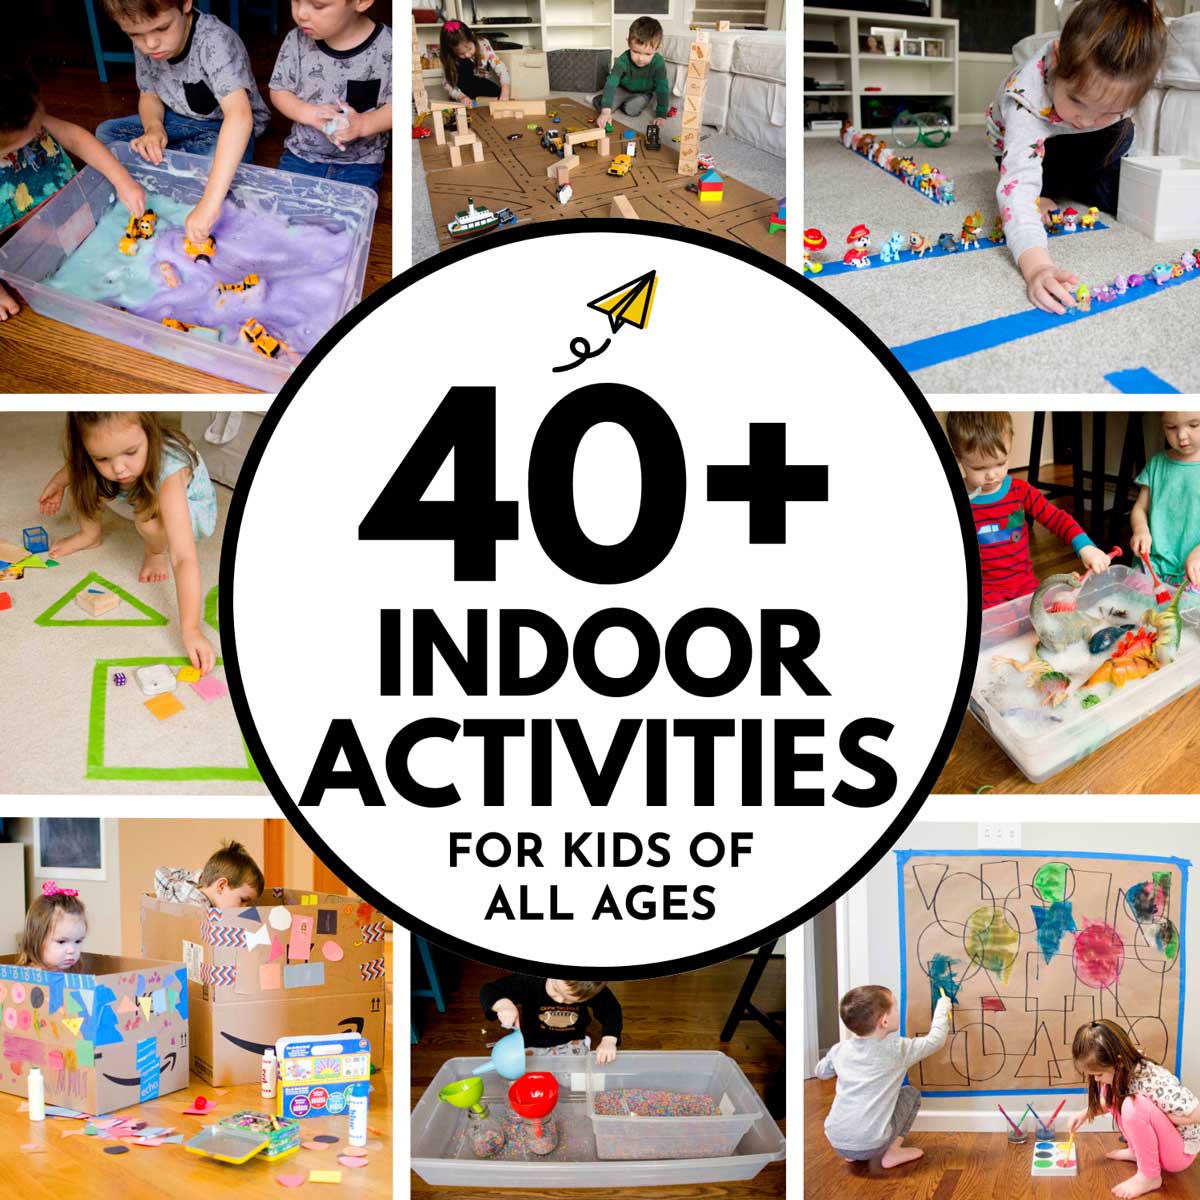 40 indoor activities for kids of all ages. Image shows 8 smaller images of various activities kids can do indoors